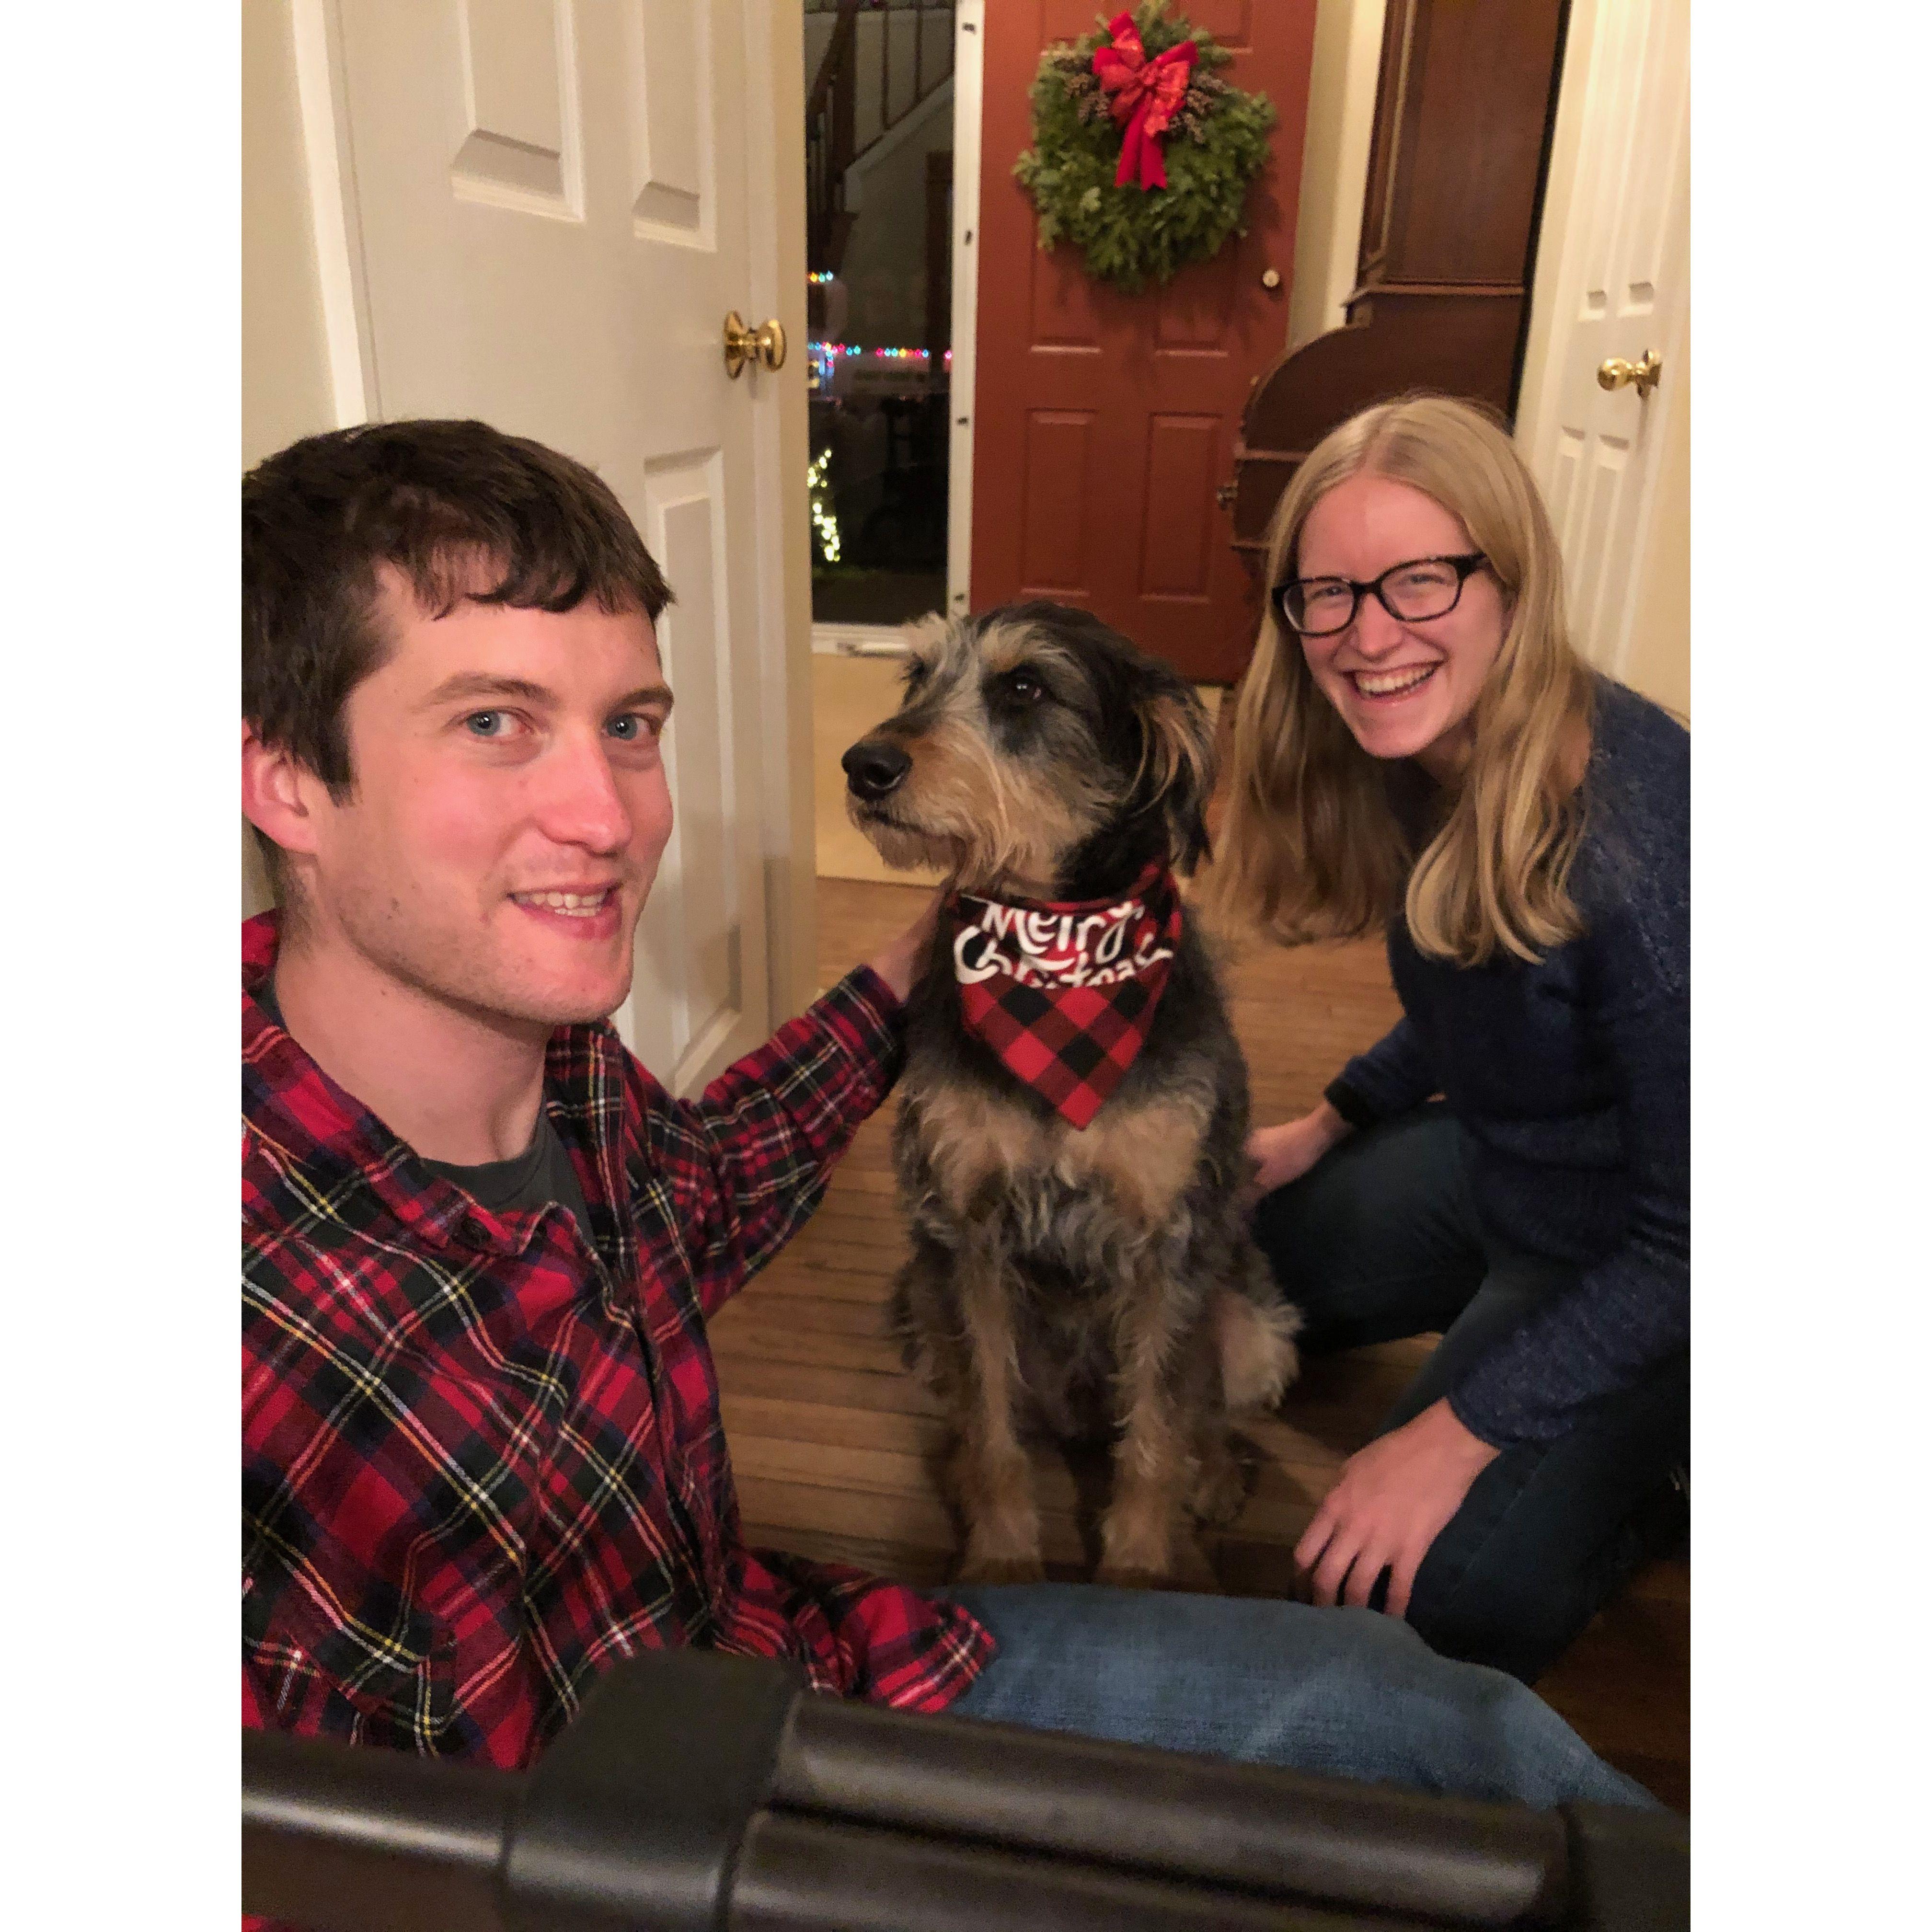 We celebrated our first Christmas together with JP's mom's dog, Bear